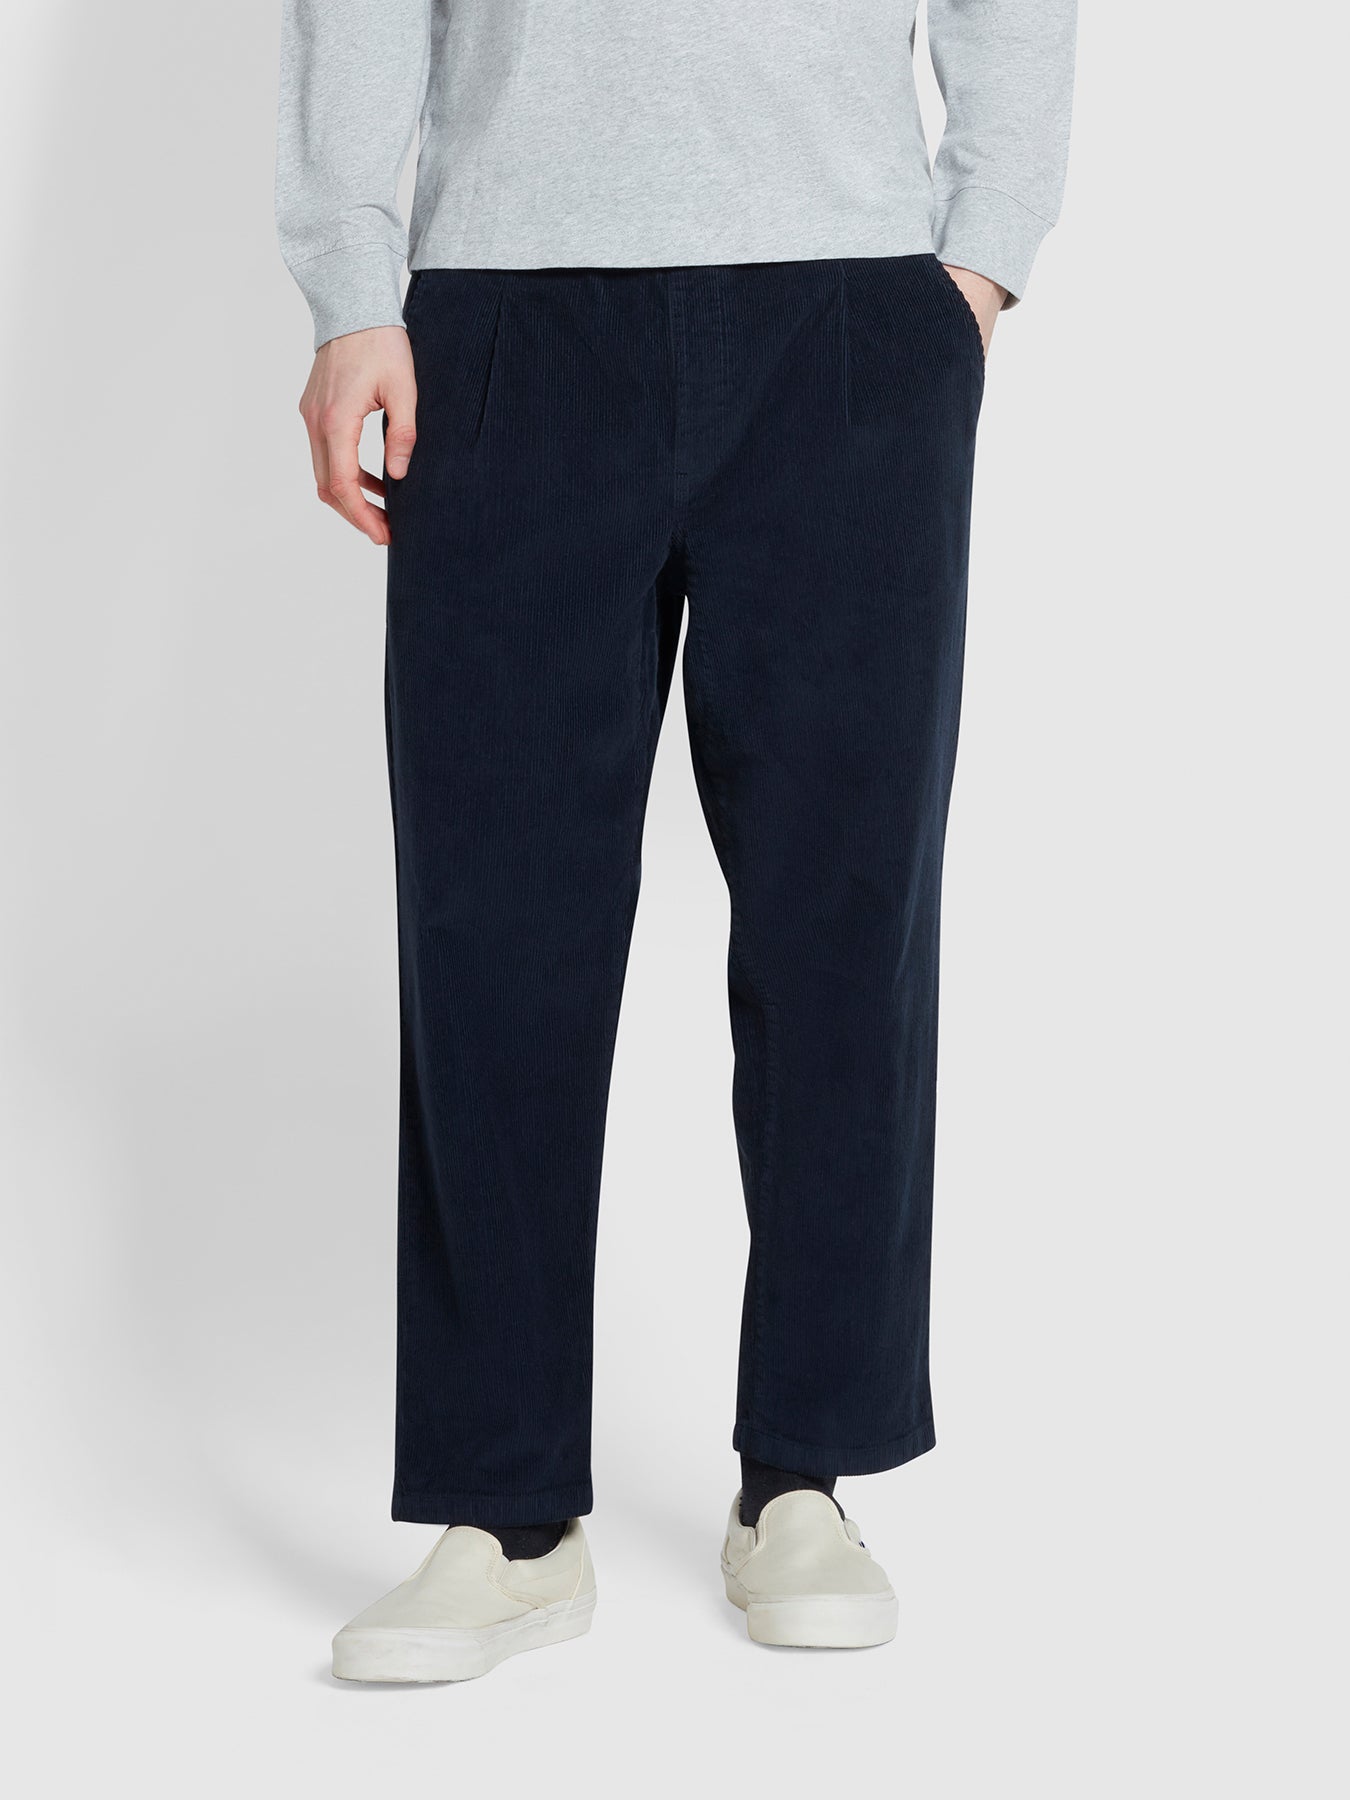 View Hawtin Tapered Fit Drawstring Cord Trousers In True Navy information